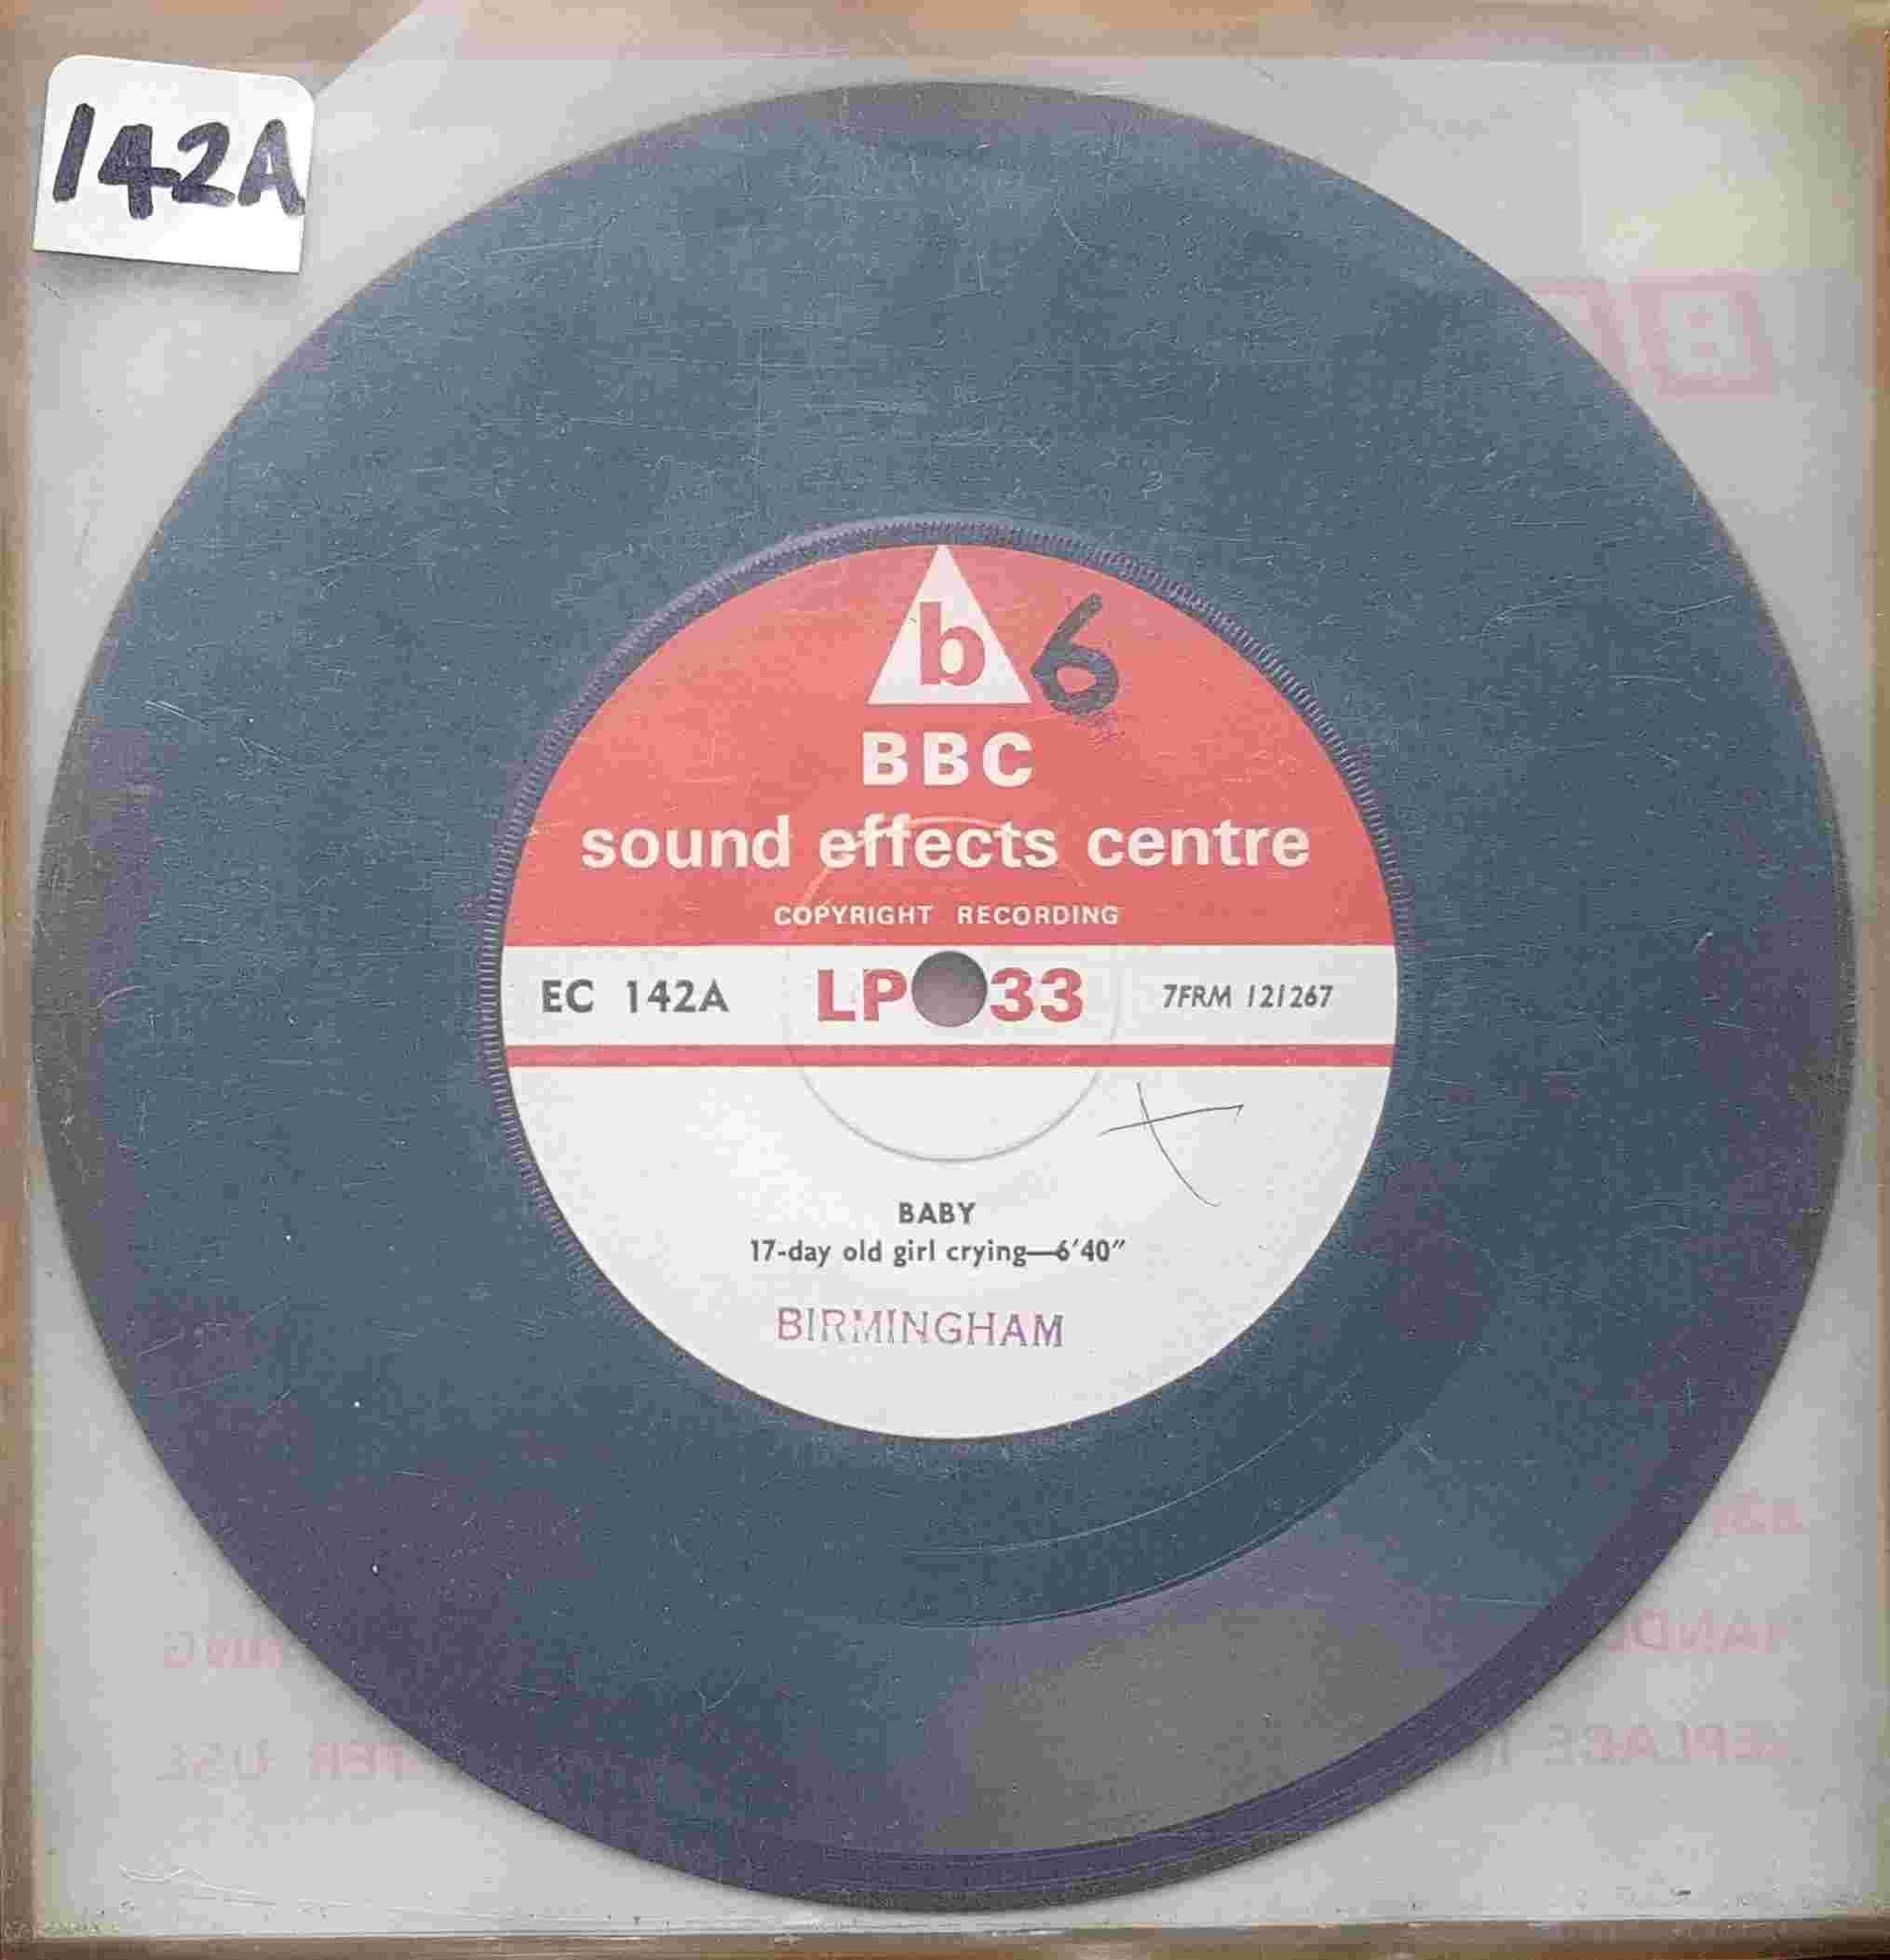 Picture of EC 142A Baby by artist Not registered from the BBC records and Tapes library